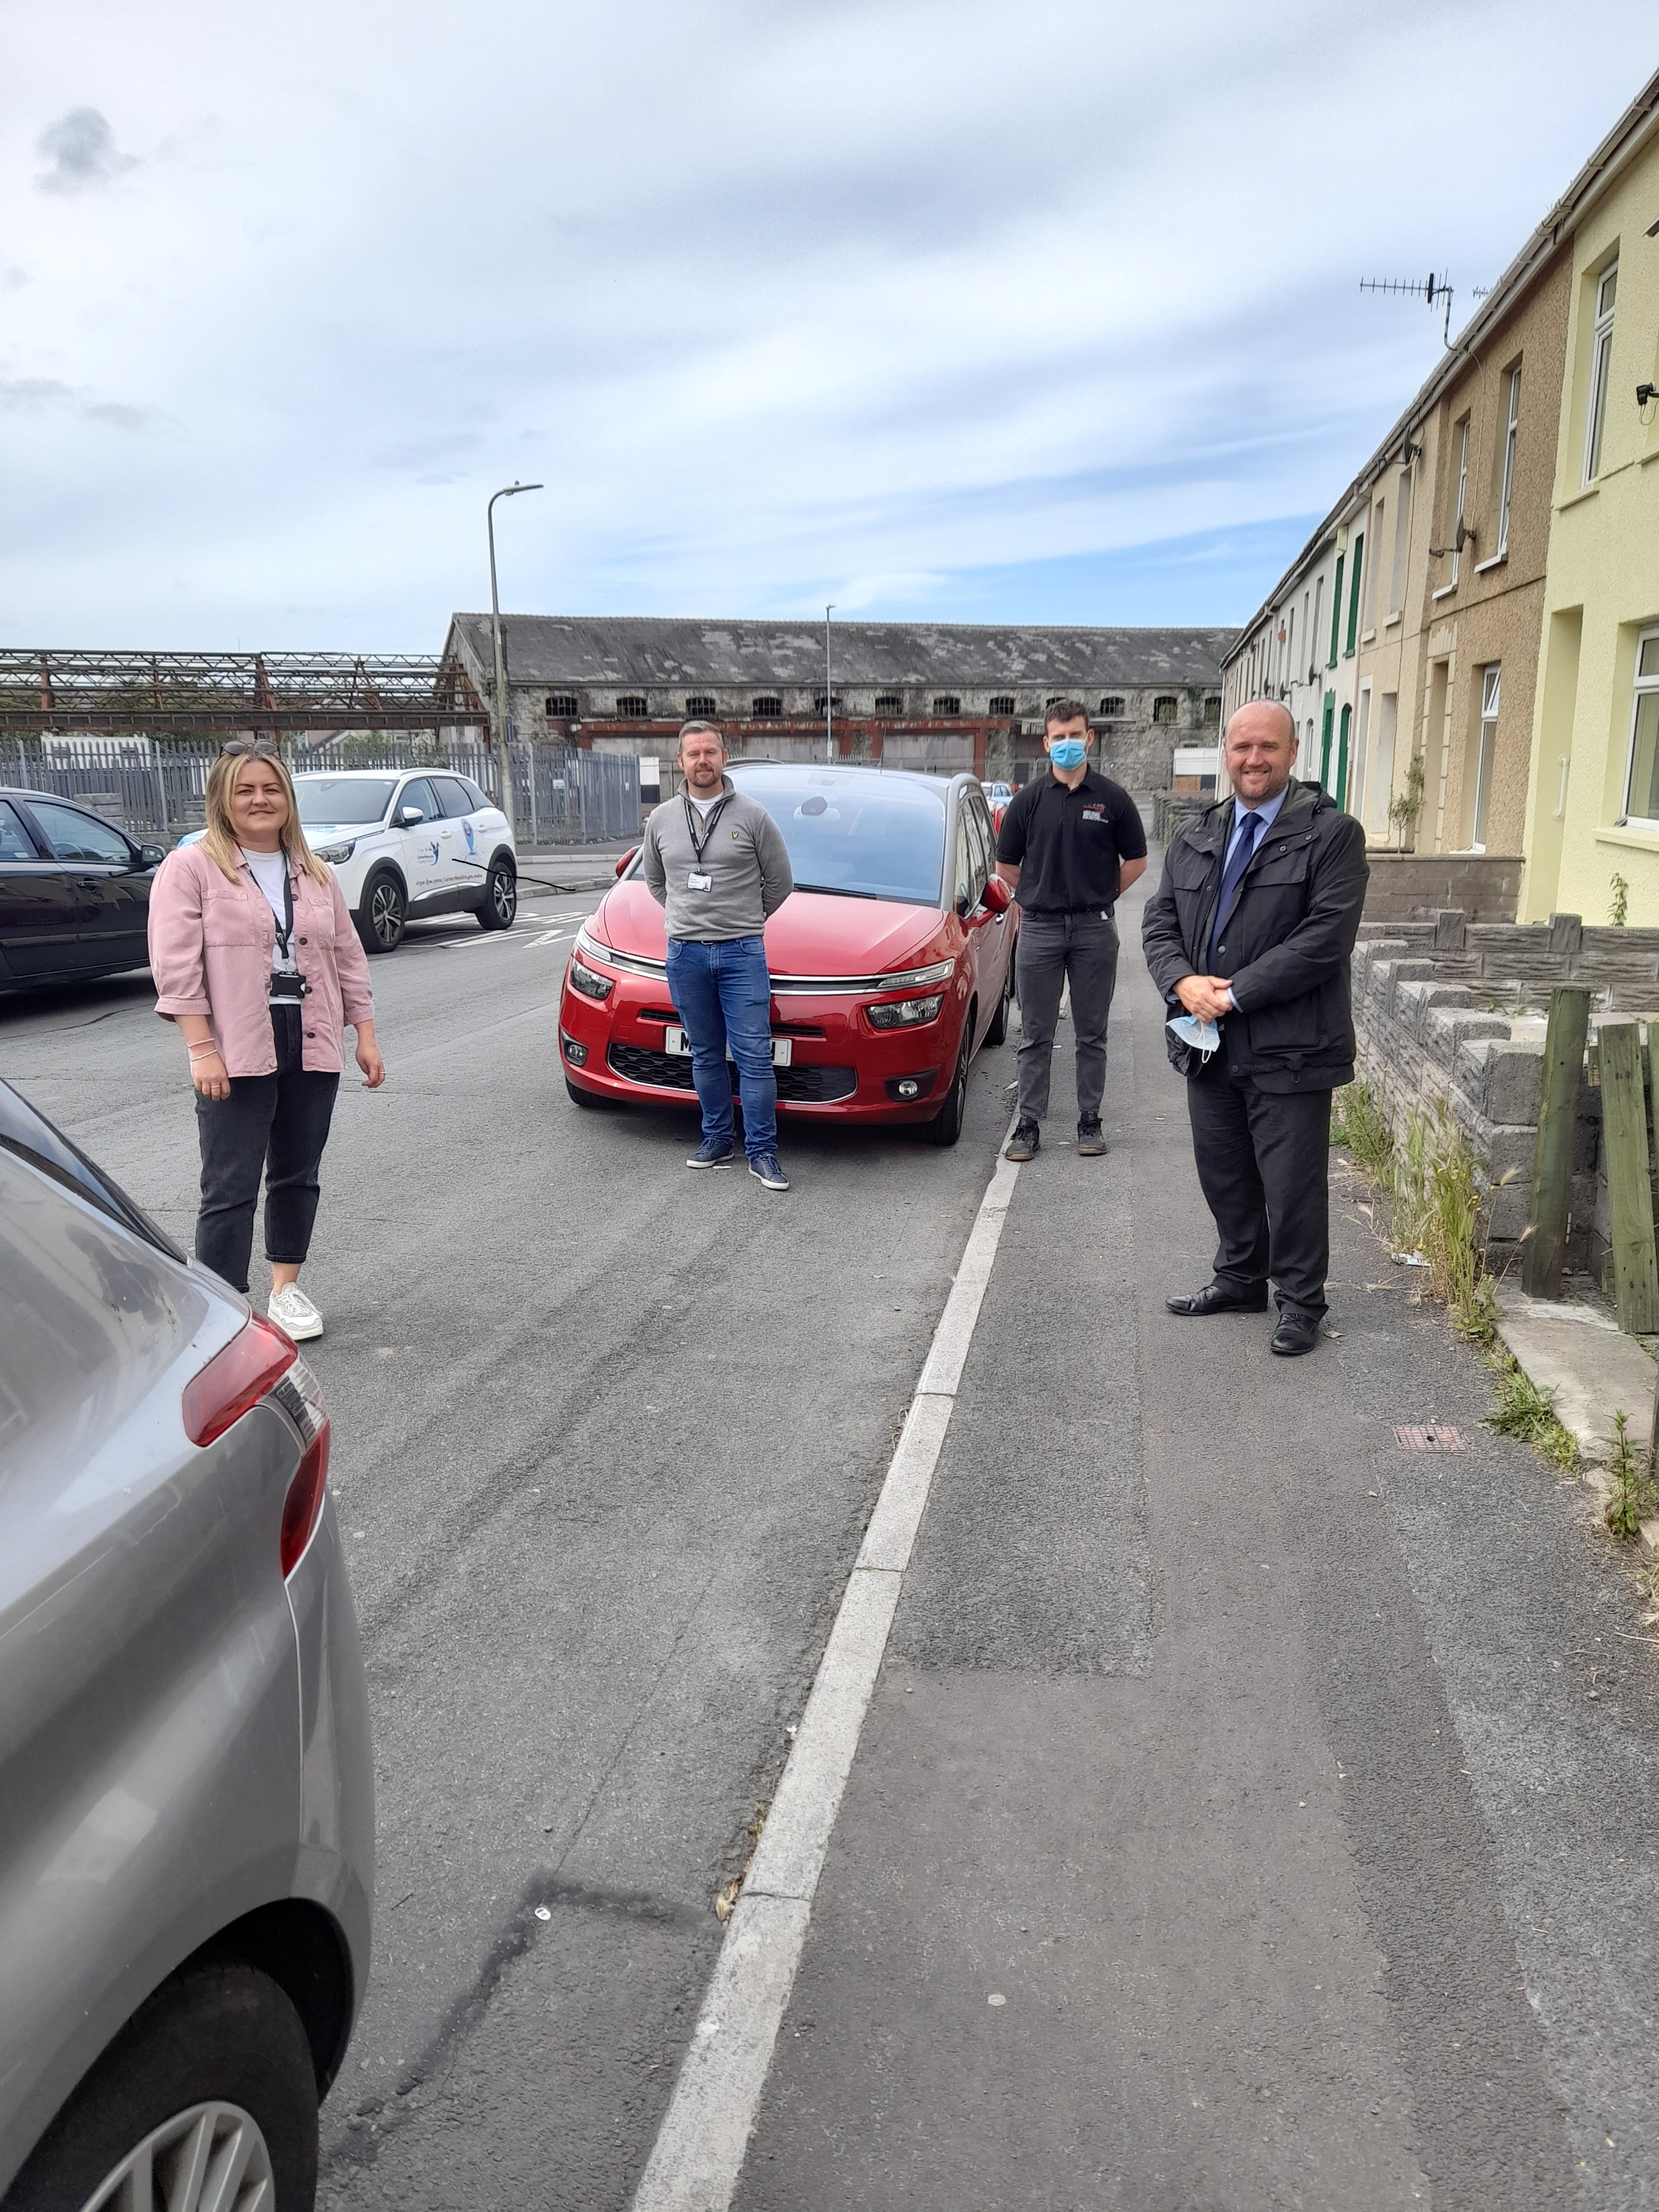 Picture: Police and Crime Commissioner, Dafydd Llywelyn with local Officers and Wardens visiting residents in Llanelli town centre as part of the Safer Streets initiative.